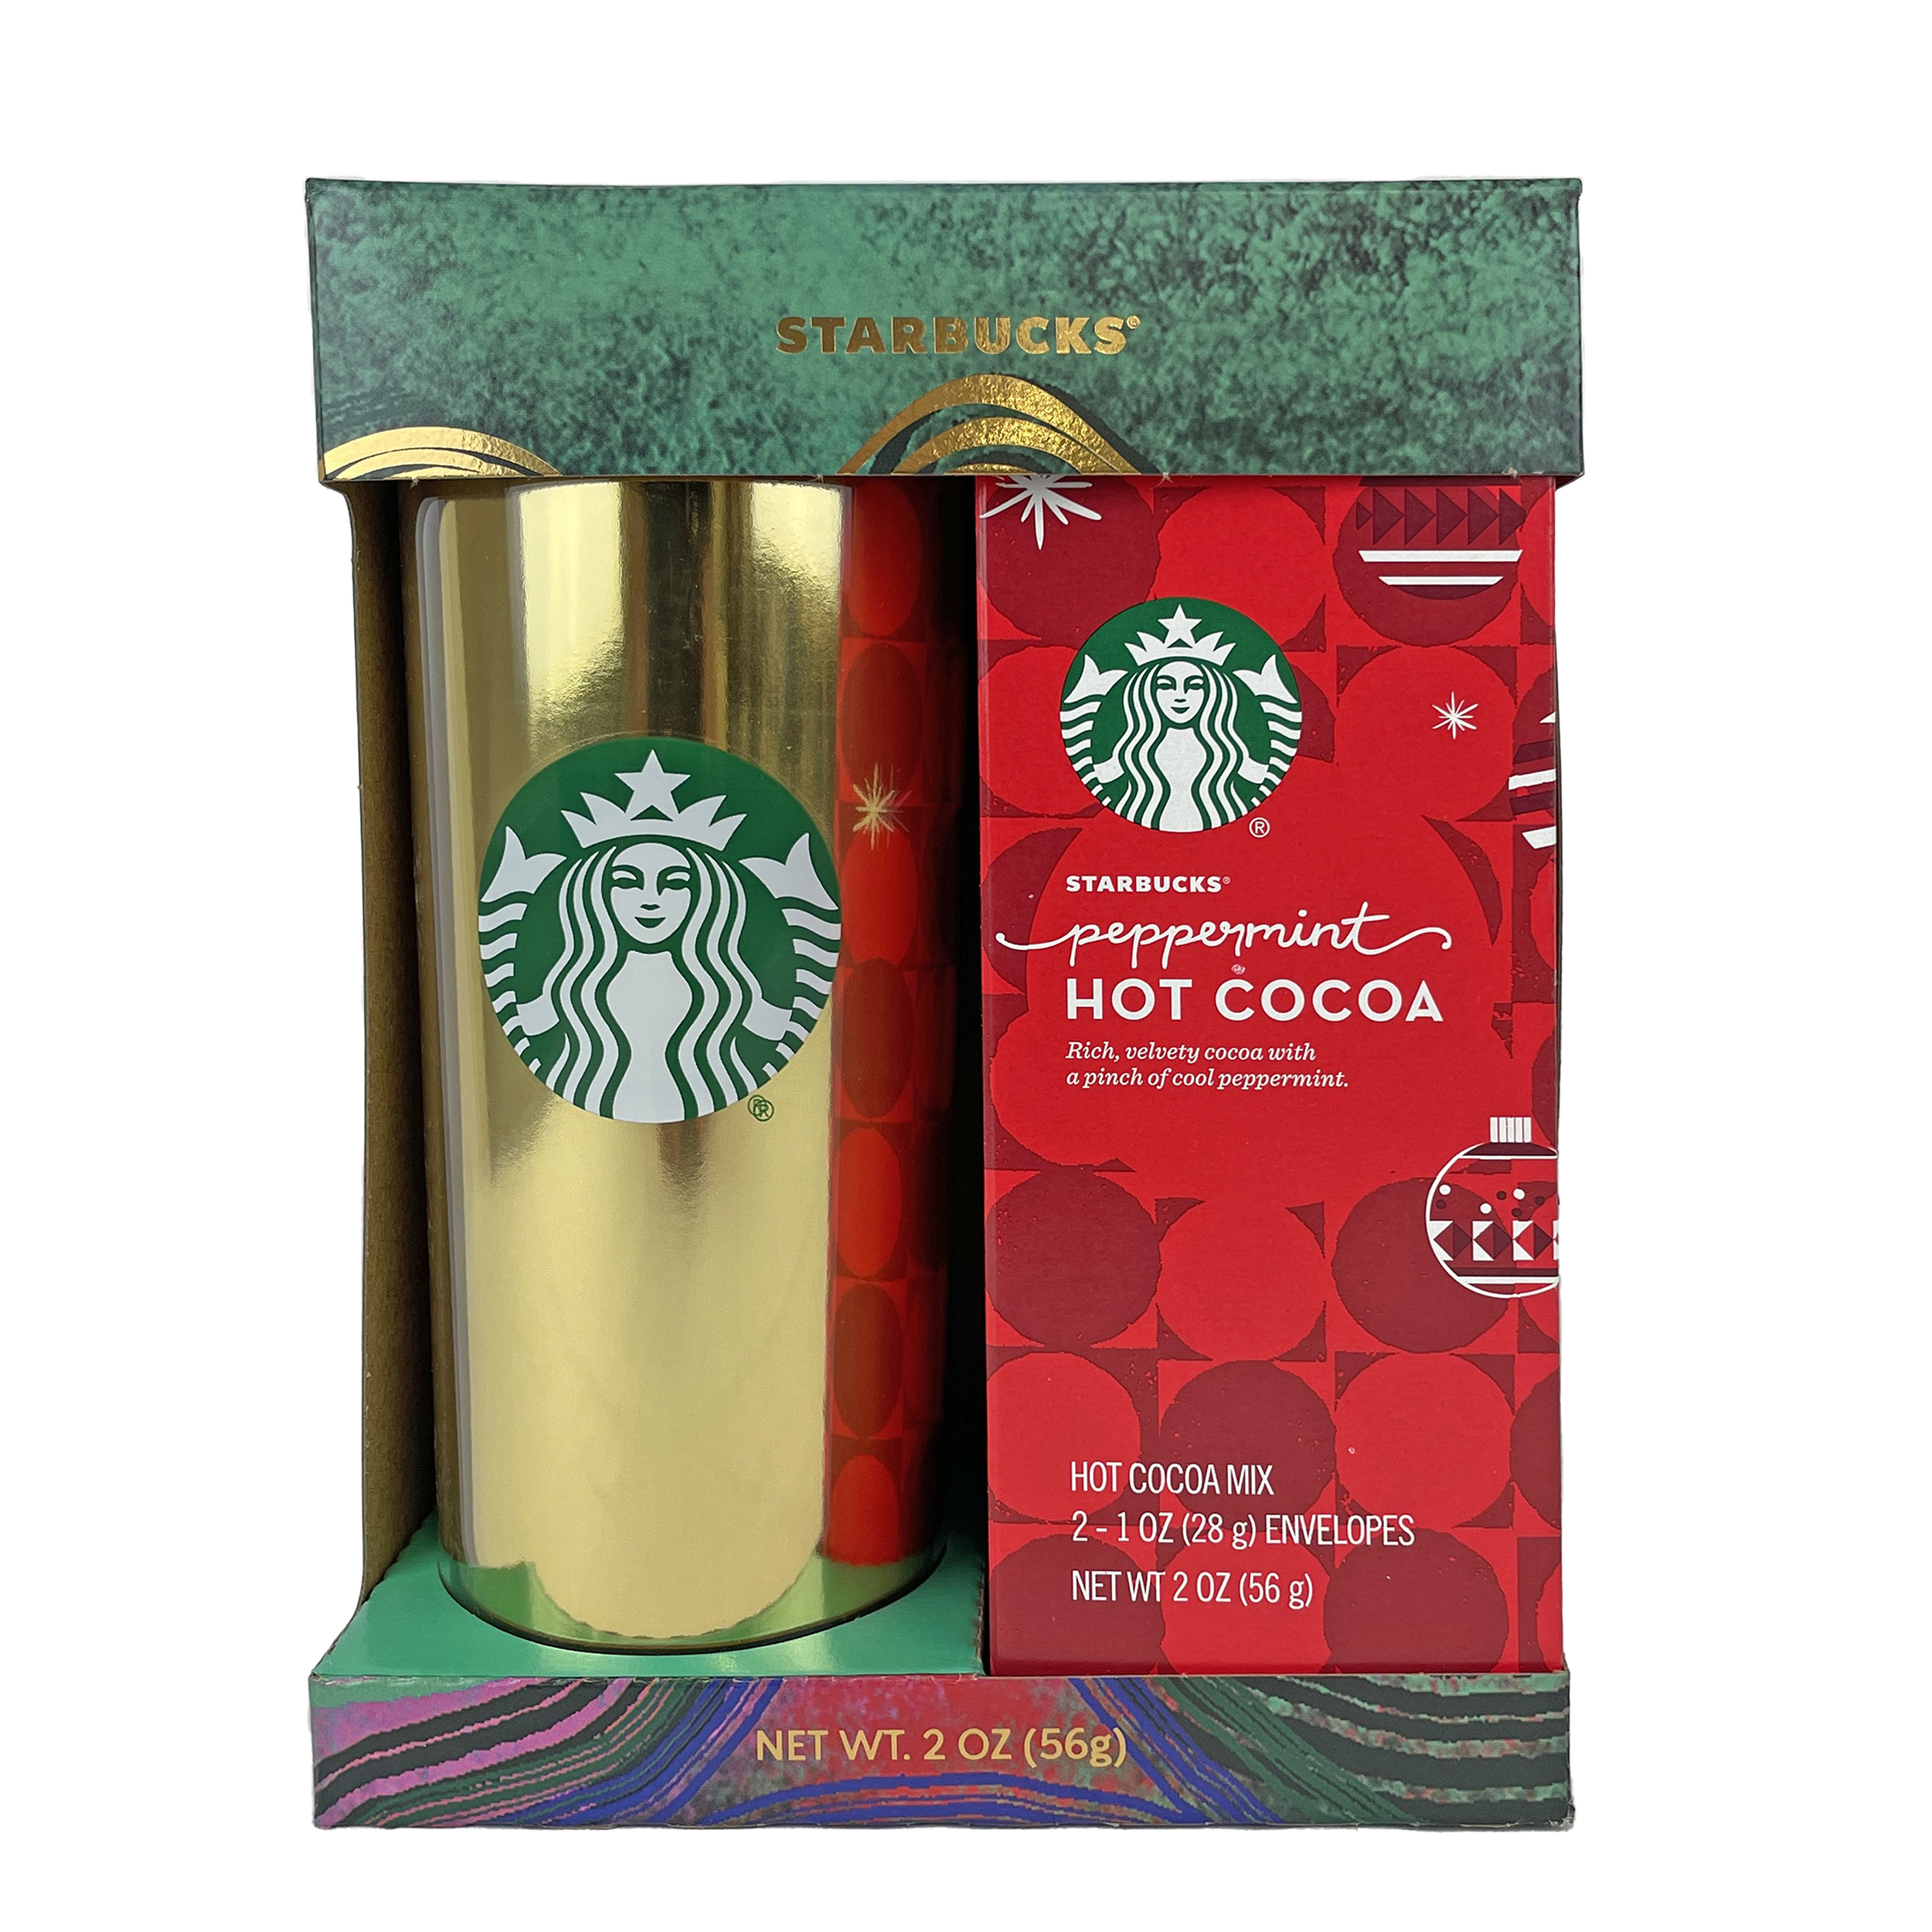 Starbucks Holiday Gift Pack - Savor the moment with Stainless Steel Tumbler and Starbucks Peppermint Cocoa - image 1 of 2